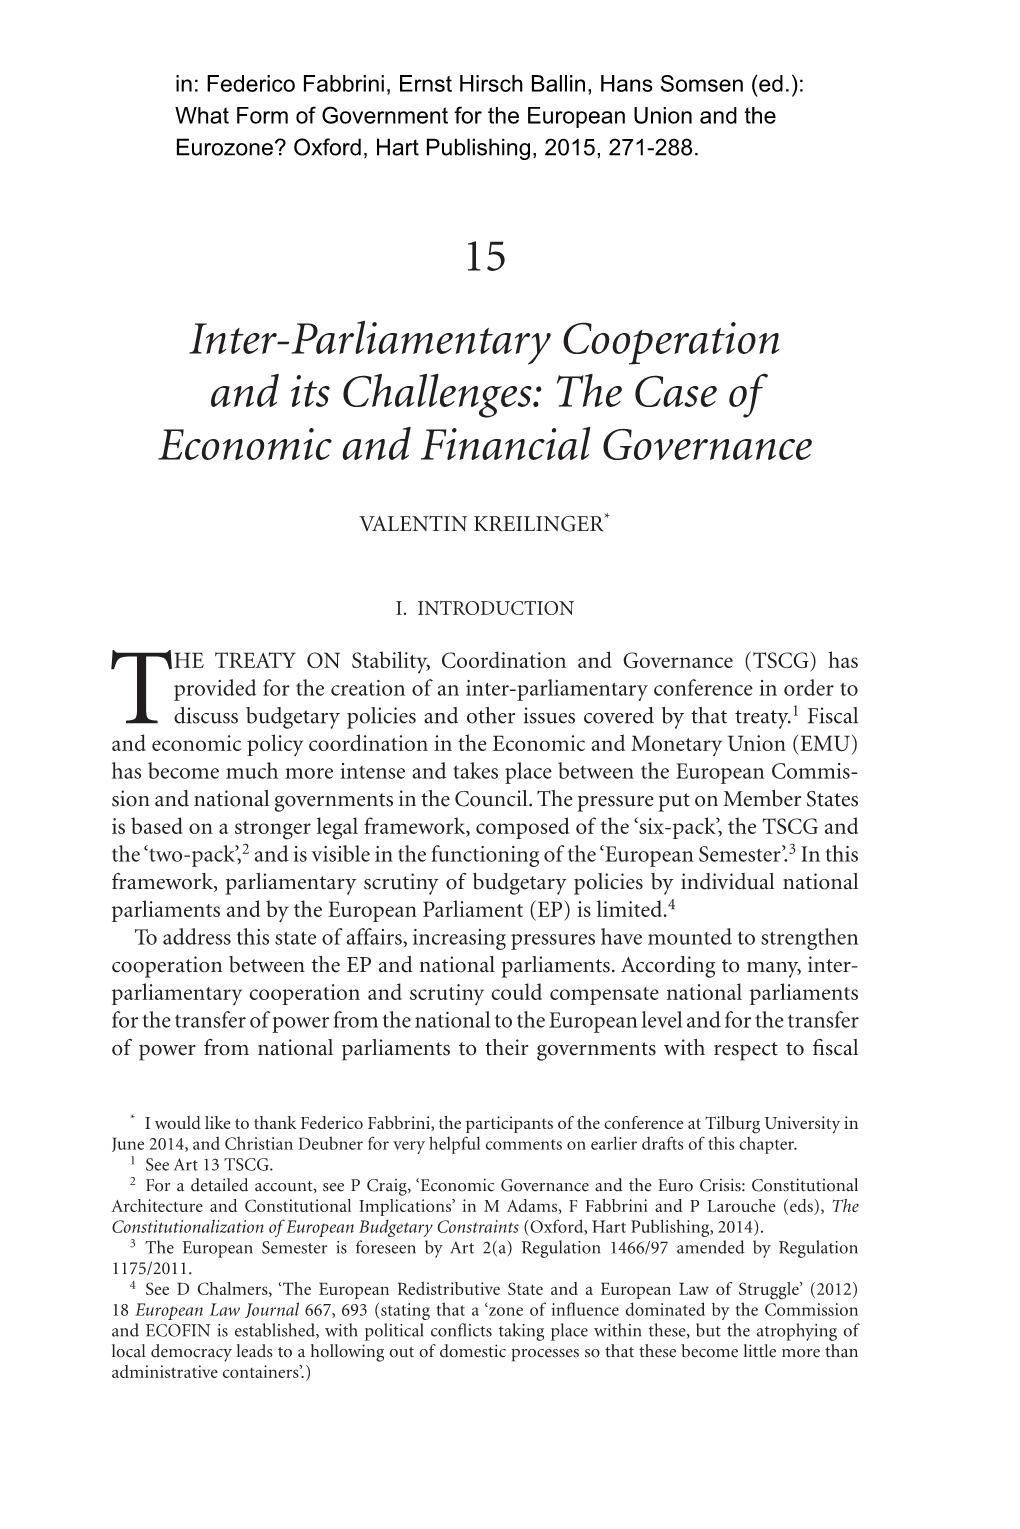 15 Inter-Parliamentary Cooperation and Its Challenges: the Case of Economic and Financial Governance